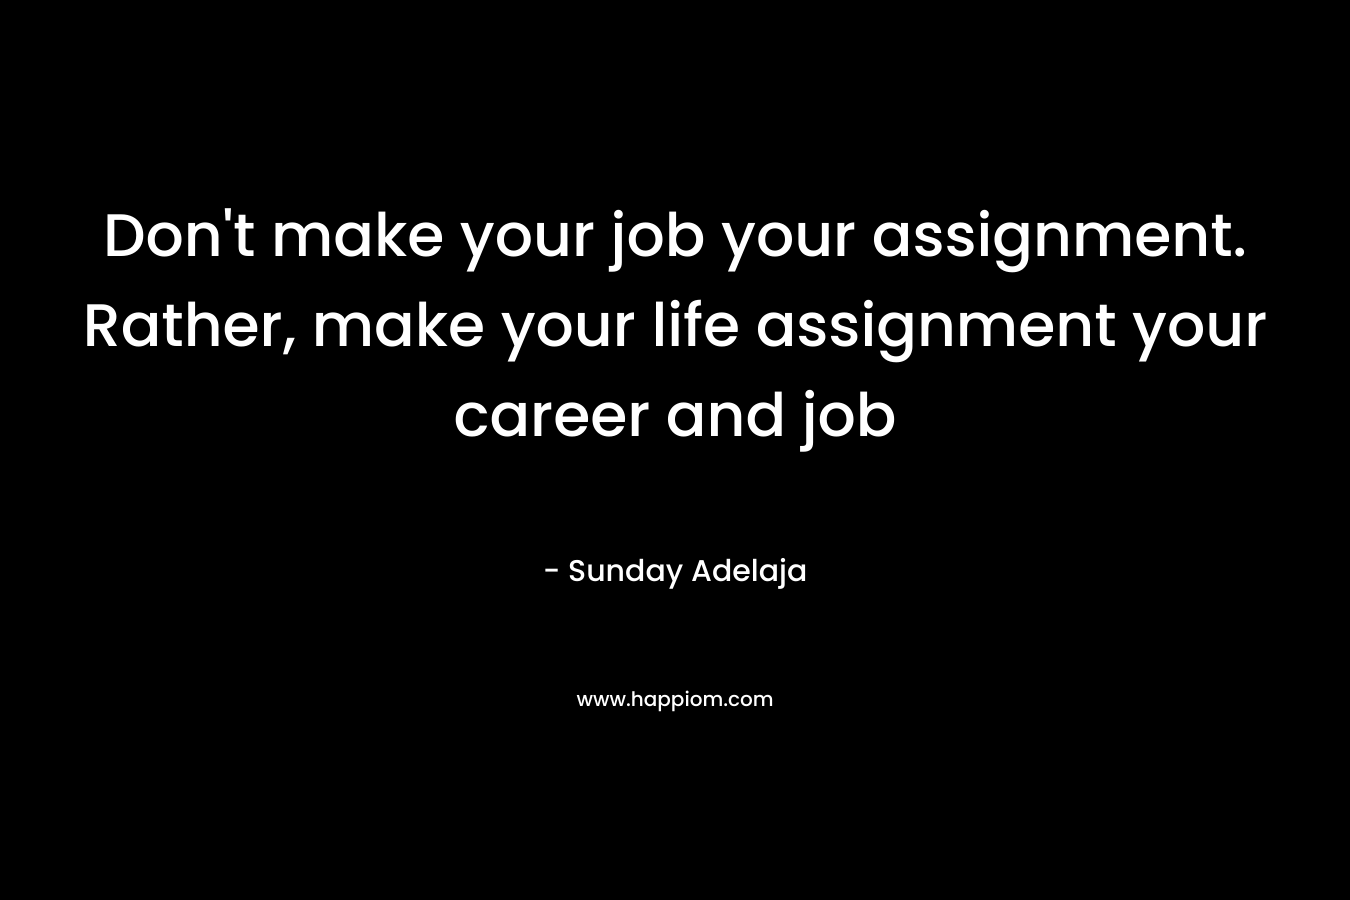 Don't make your job your assignment. Rather, make your life assignment your career and job